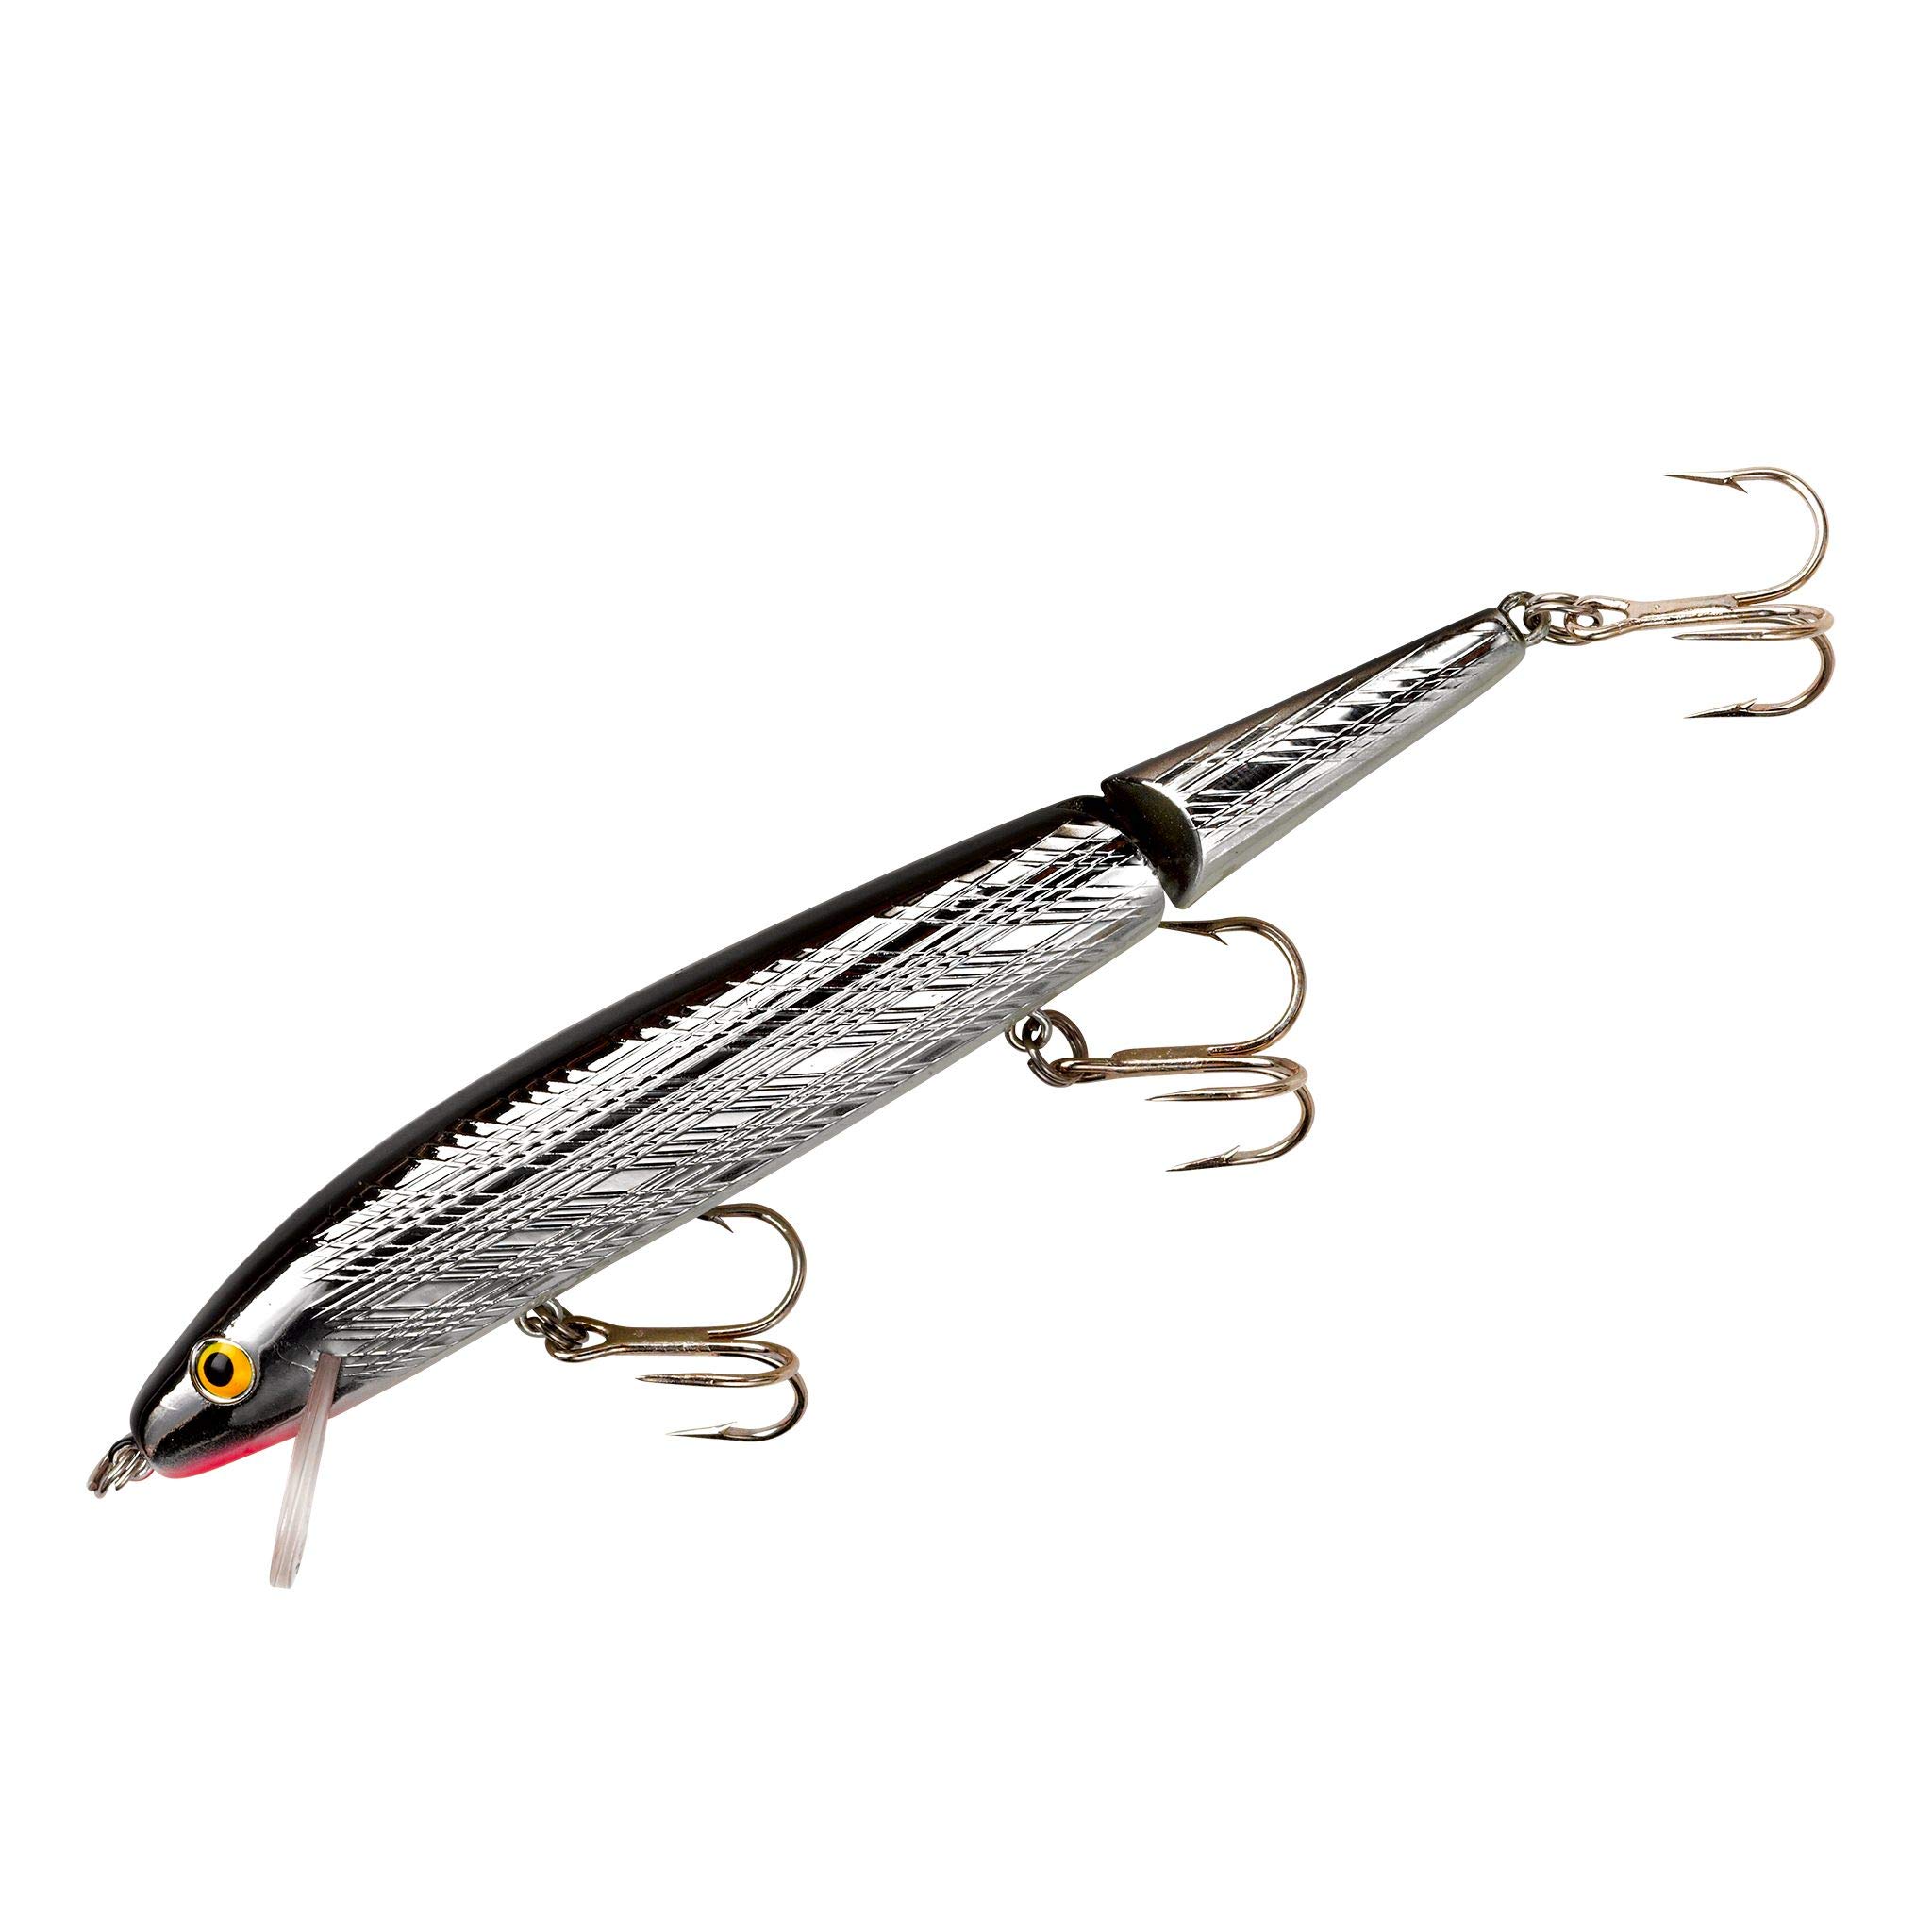 Rebel Lures Jointed Minnow Crankbait Fishing Lure 1 7/8 in, 3/32 oz  Silver/Black